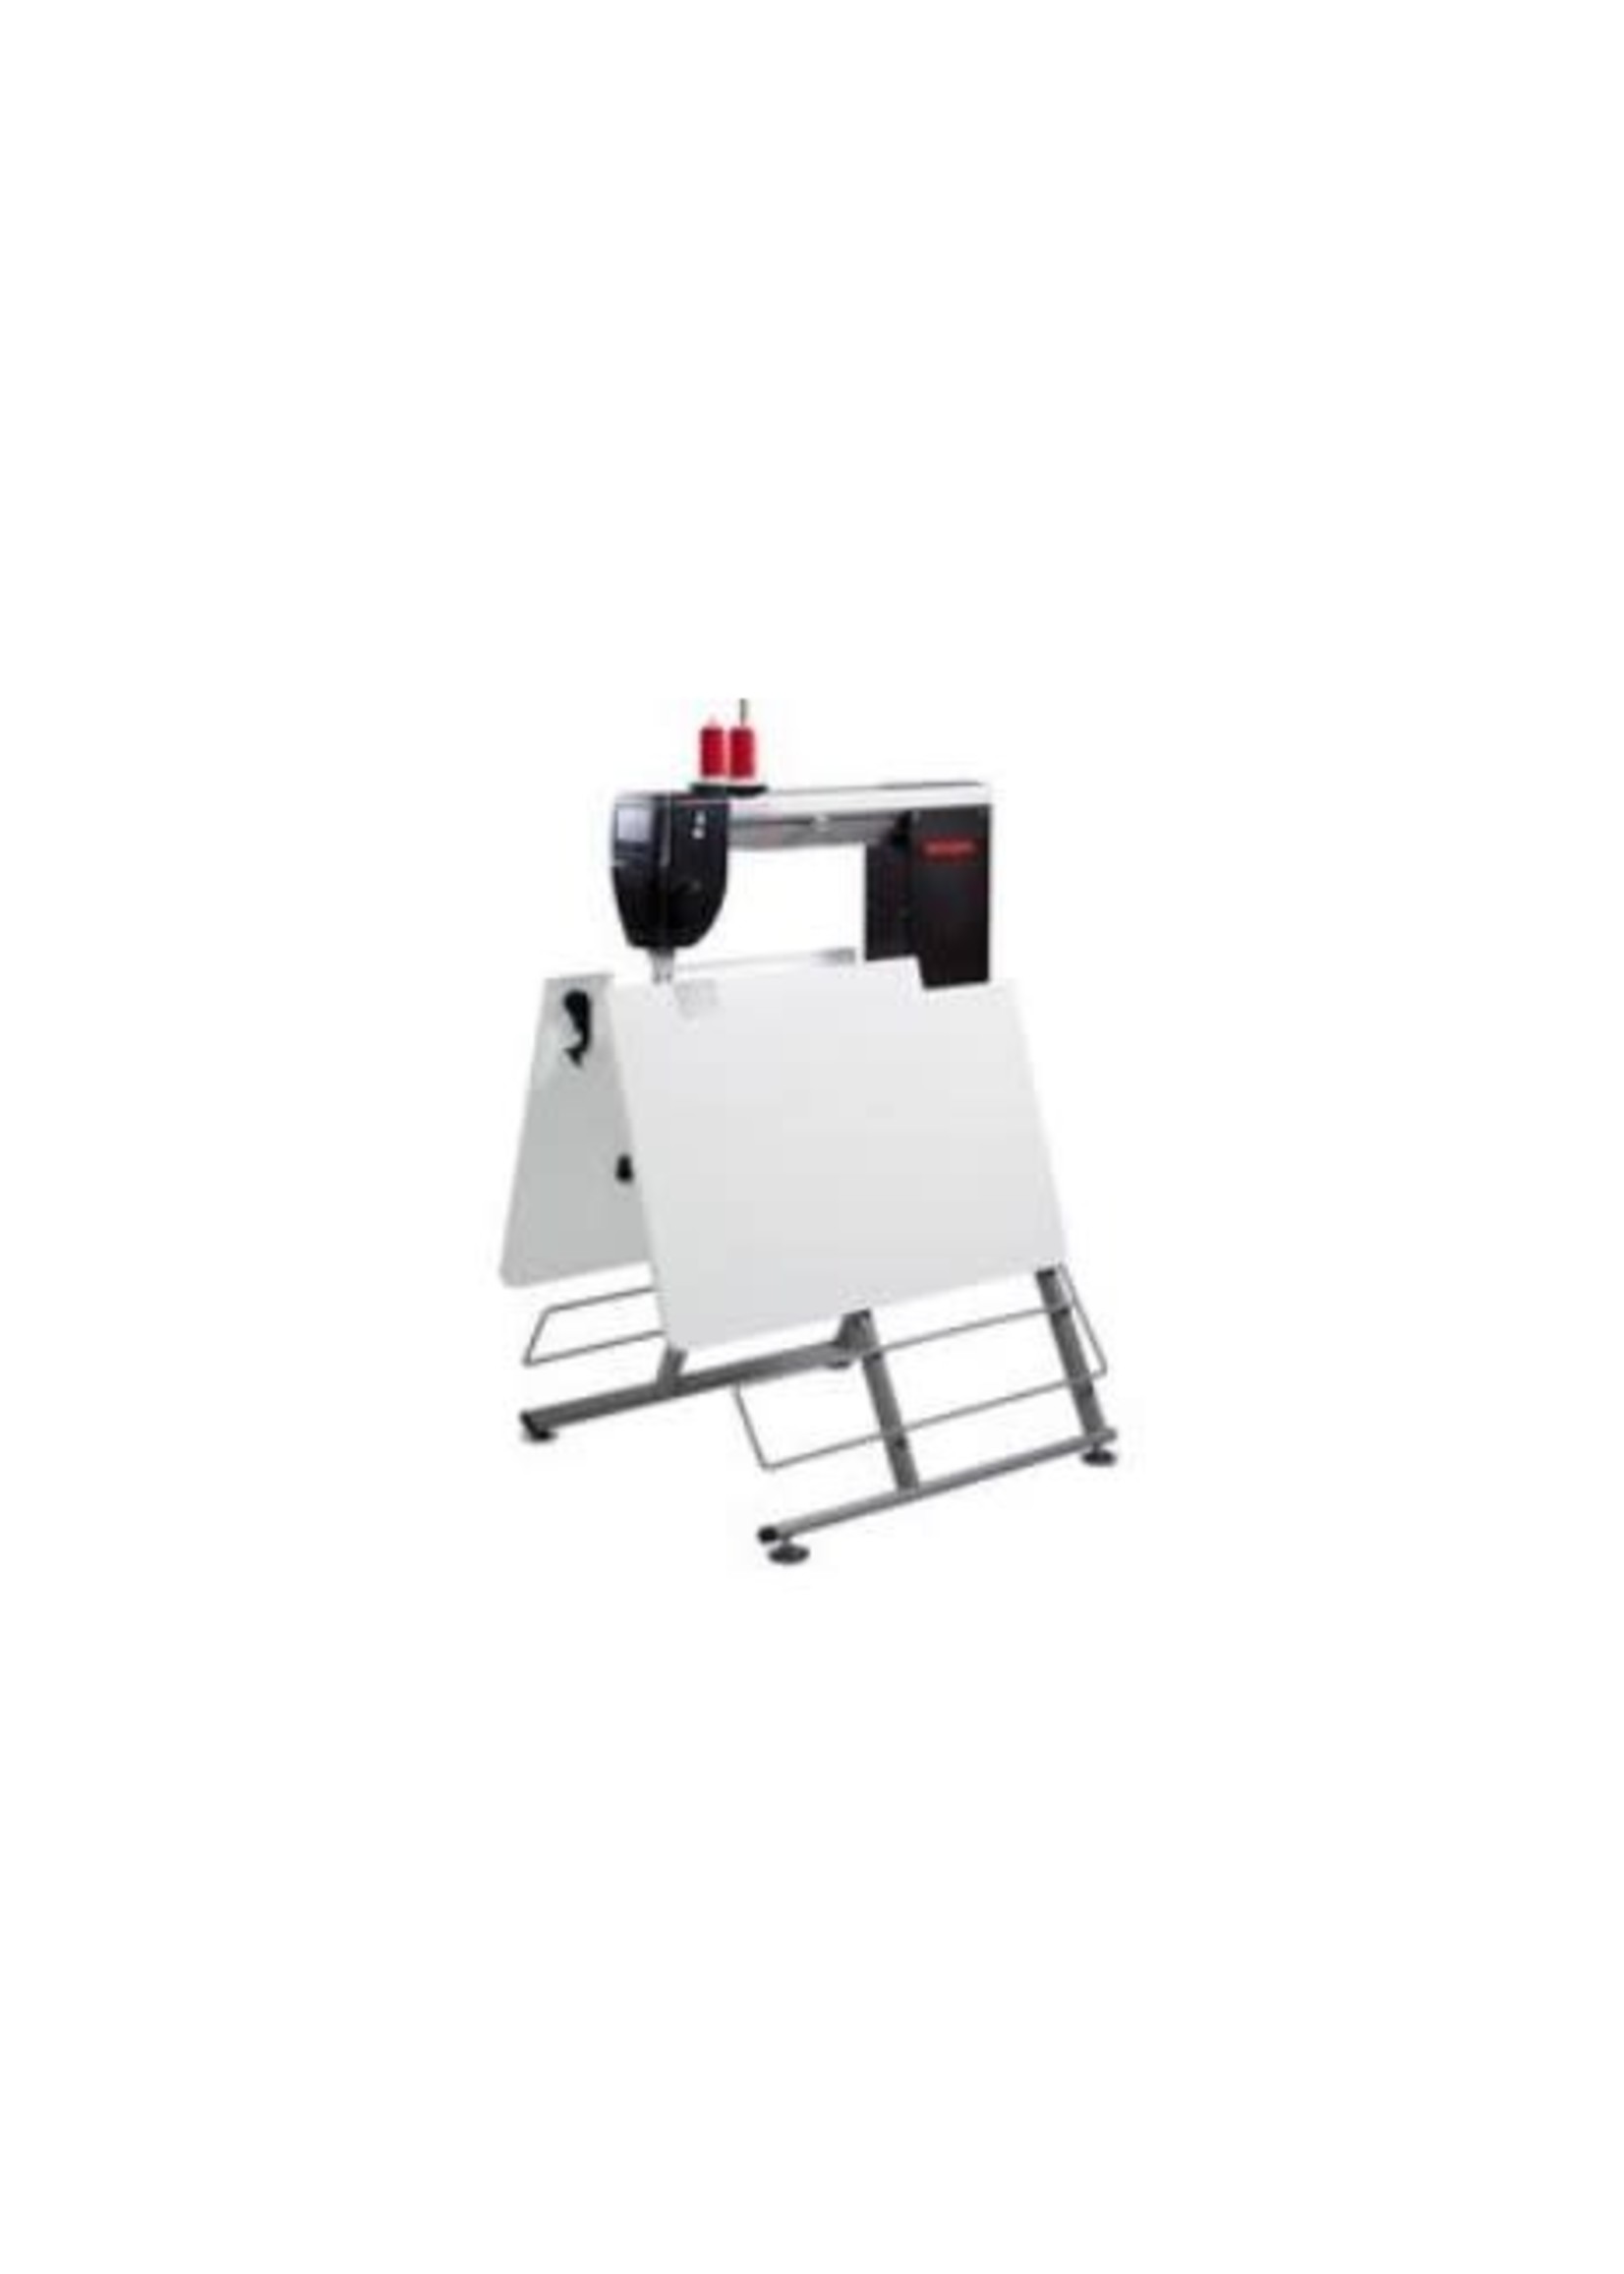 Bernina Bernina Q16 with foldable table - AVAILABLE FOR IN-STORE PURCHASE ONLY